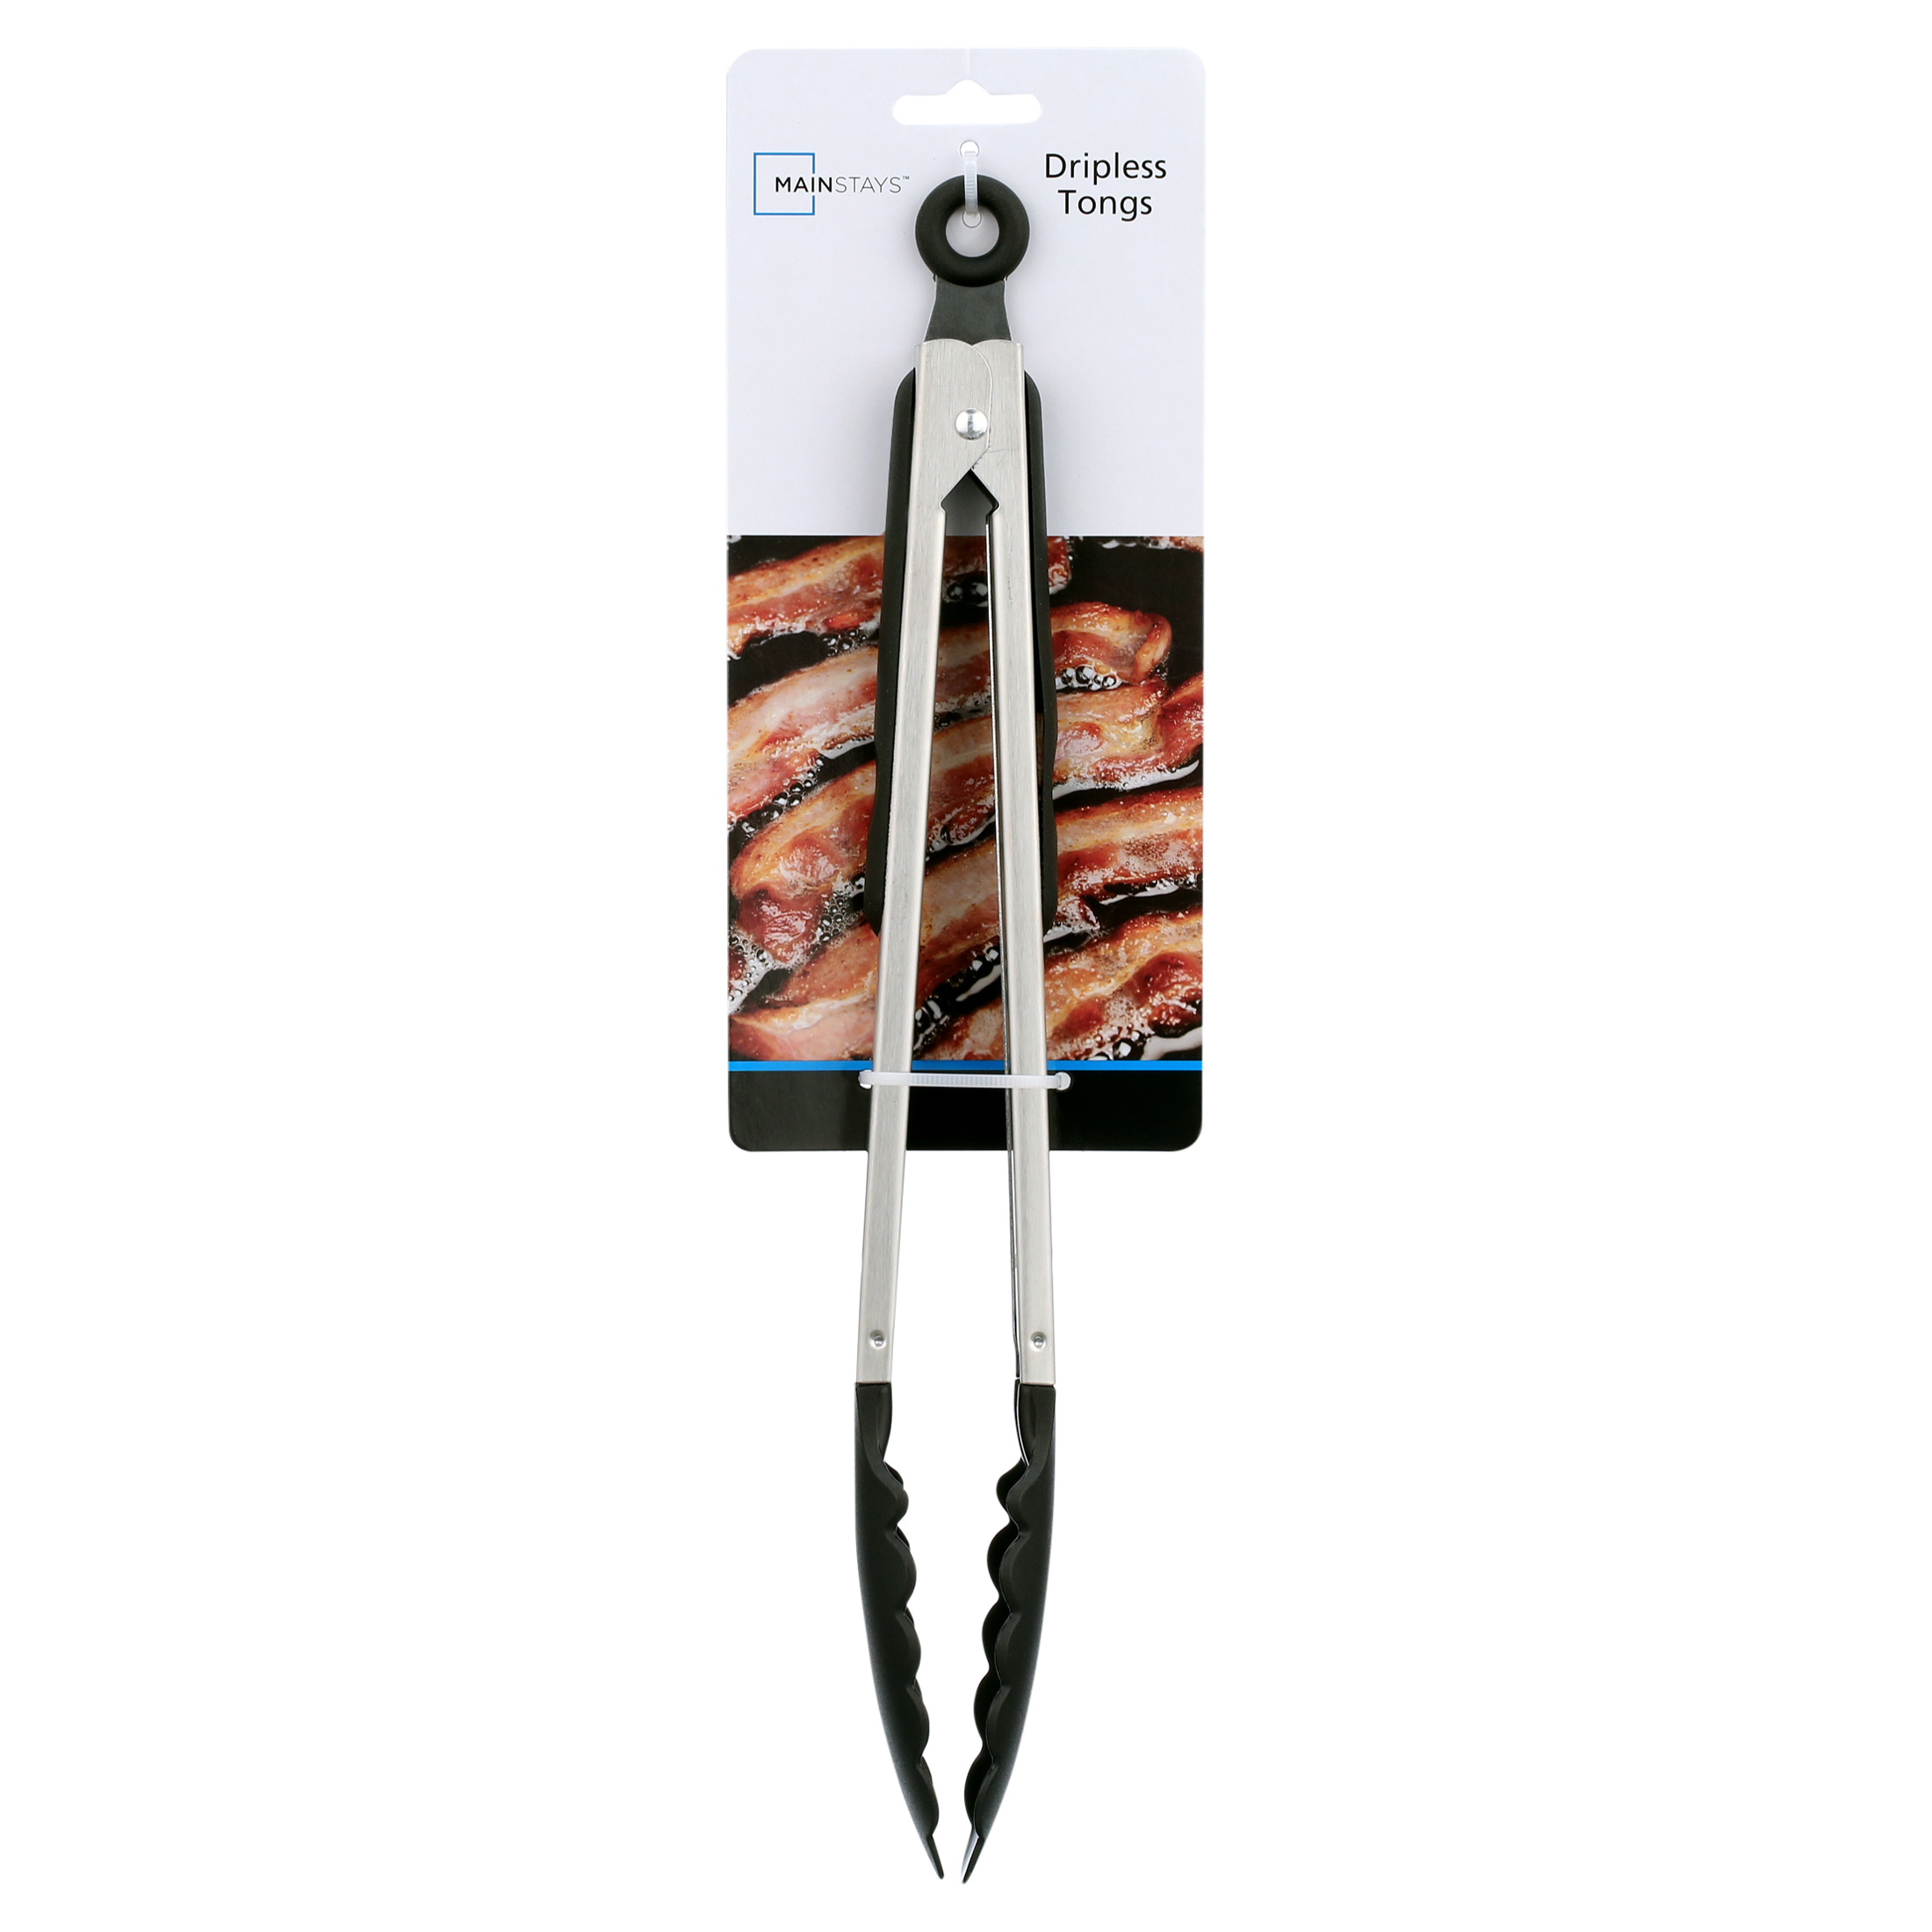 Mainstays Stainless Steel and Black Dripless Tongs - image 1 of 7